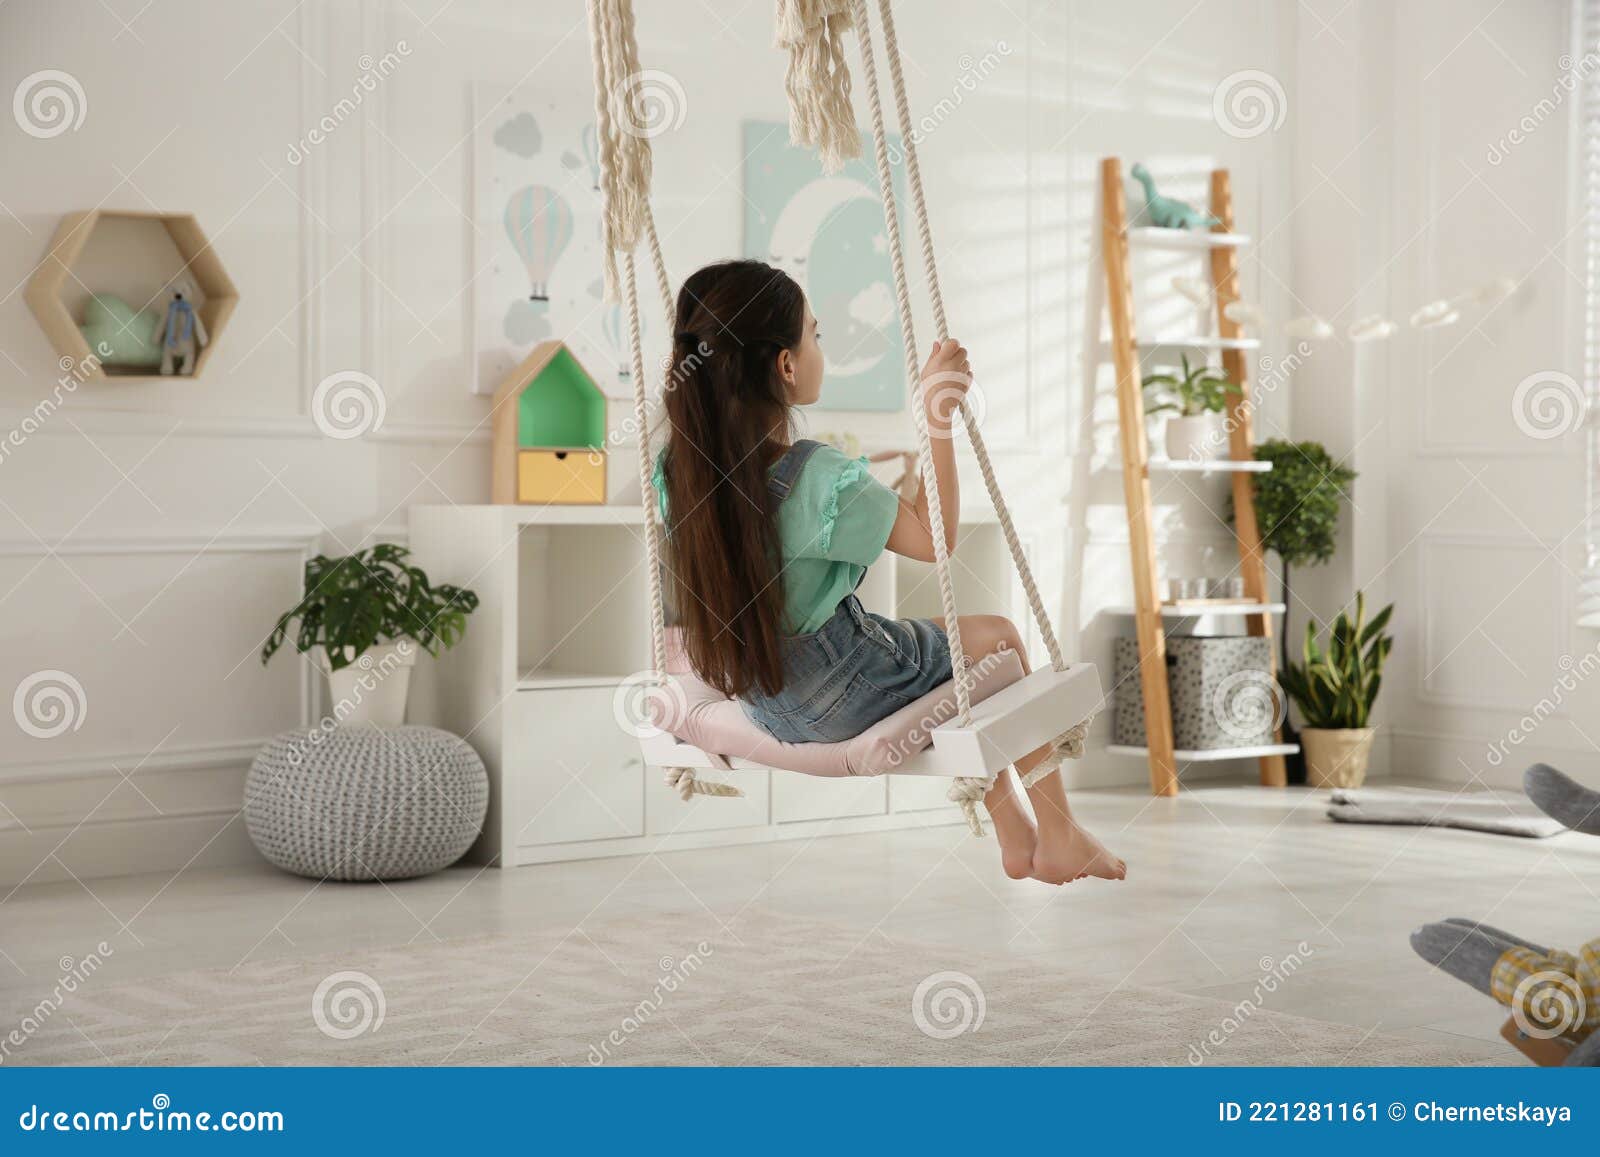 cute little girl playing on swing at home